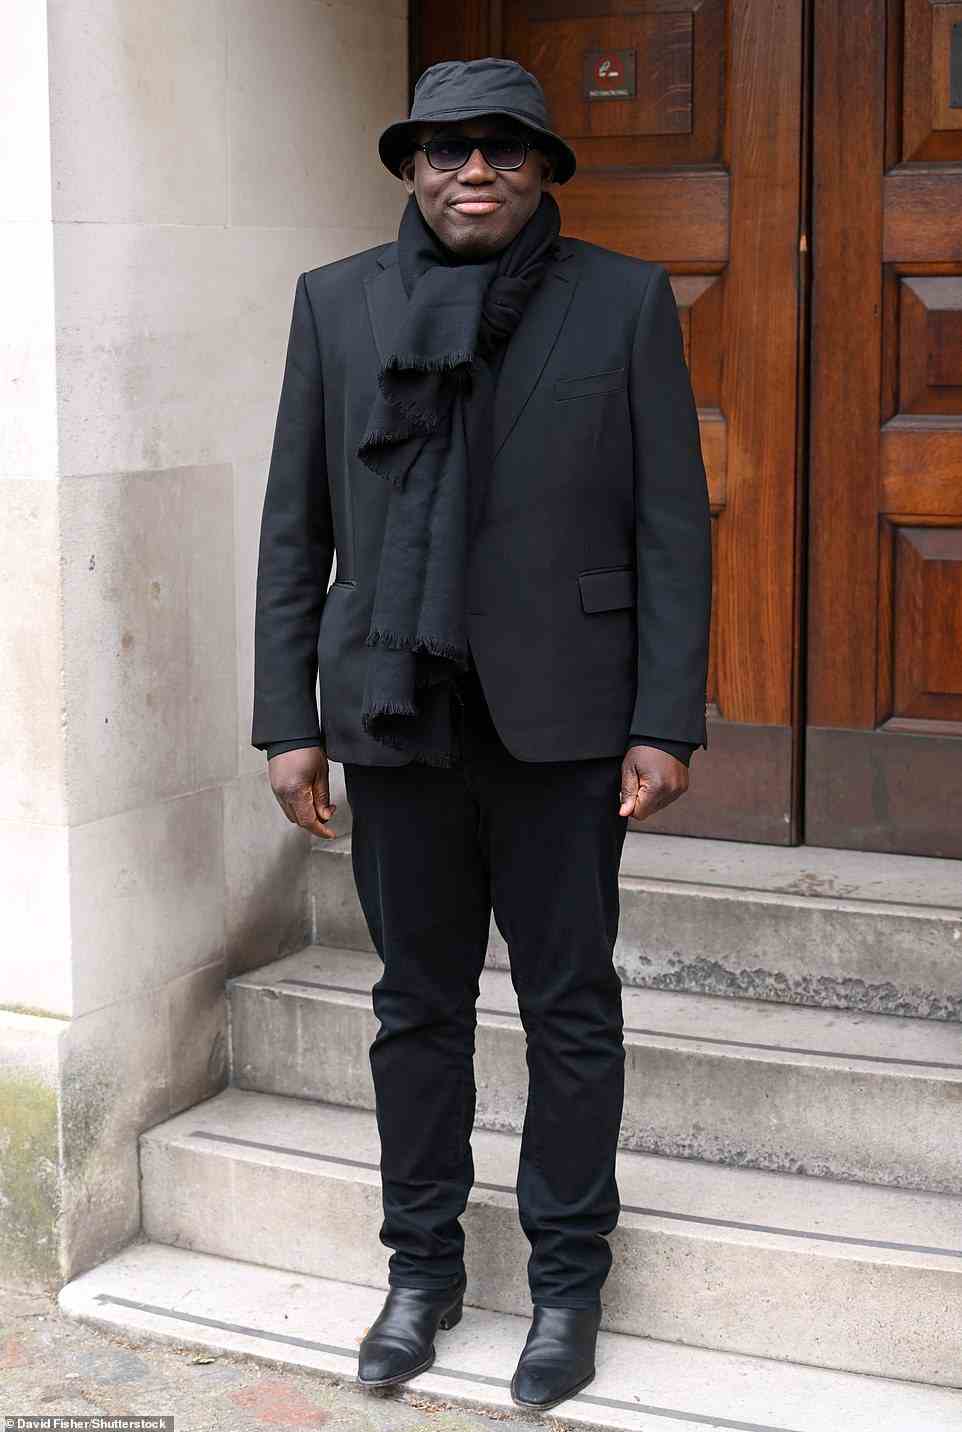 Chic: Vogue's Edward Enninful wore an all-black ensemble and a black scarf for the fashion event